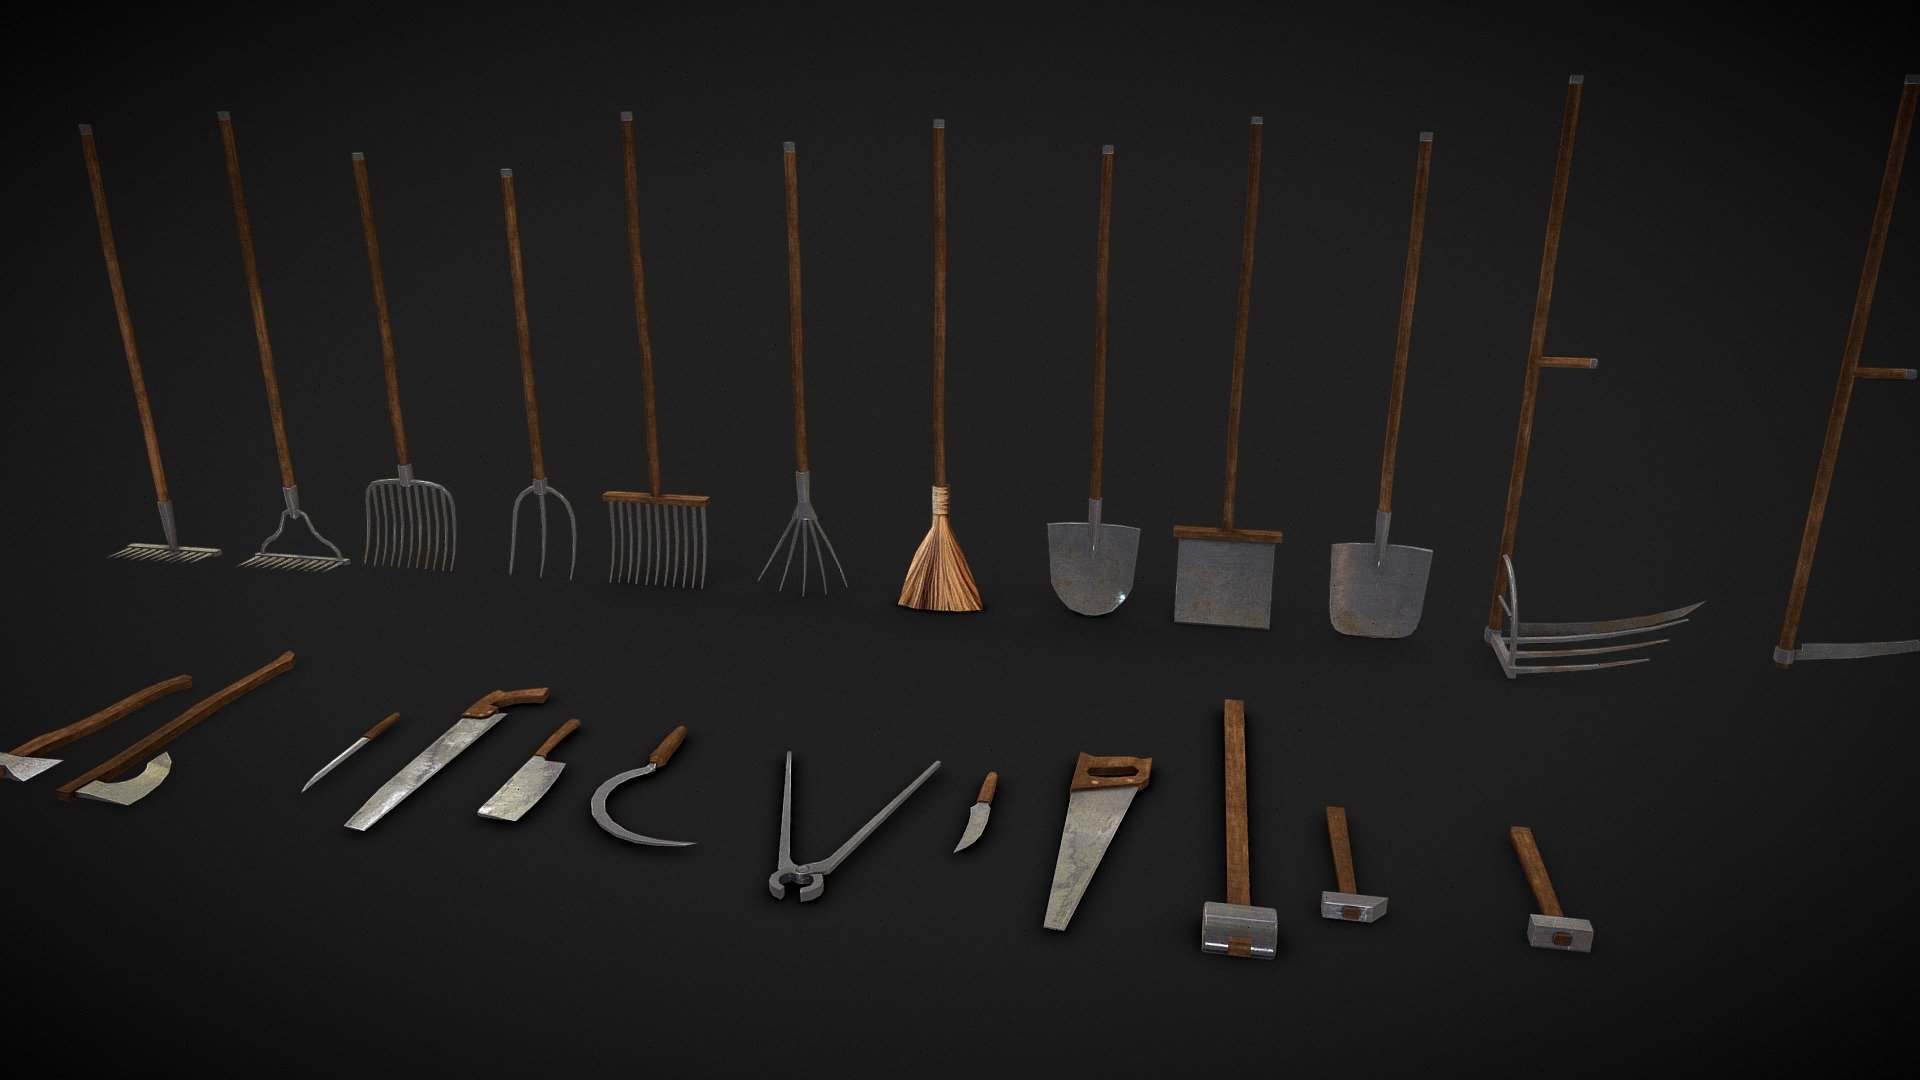 Low poly 3D Garden Tools Collection

Low poly tools for AR /VR

Mobile phone games 

metaverse game

Texture PBR Materials

2k Texture - Garden Tools pack - Buy Royalty Free 3D model by pradeep Thapliyal (@pradeep1) 3d model